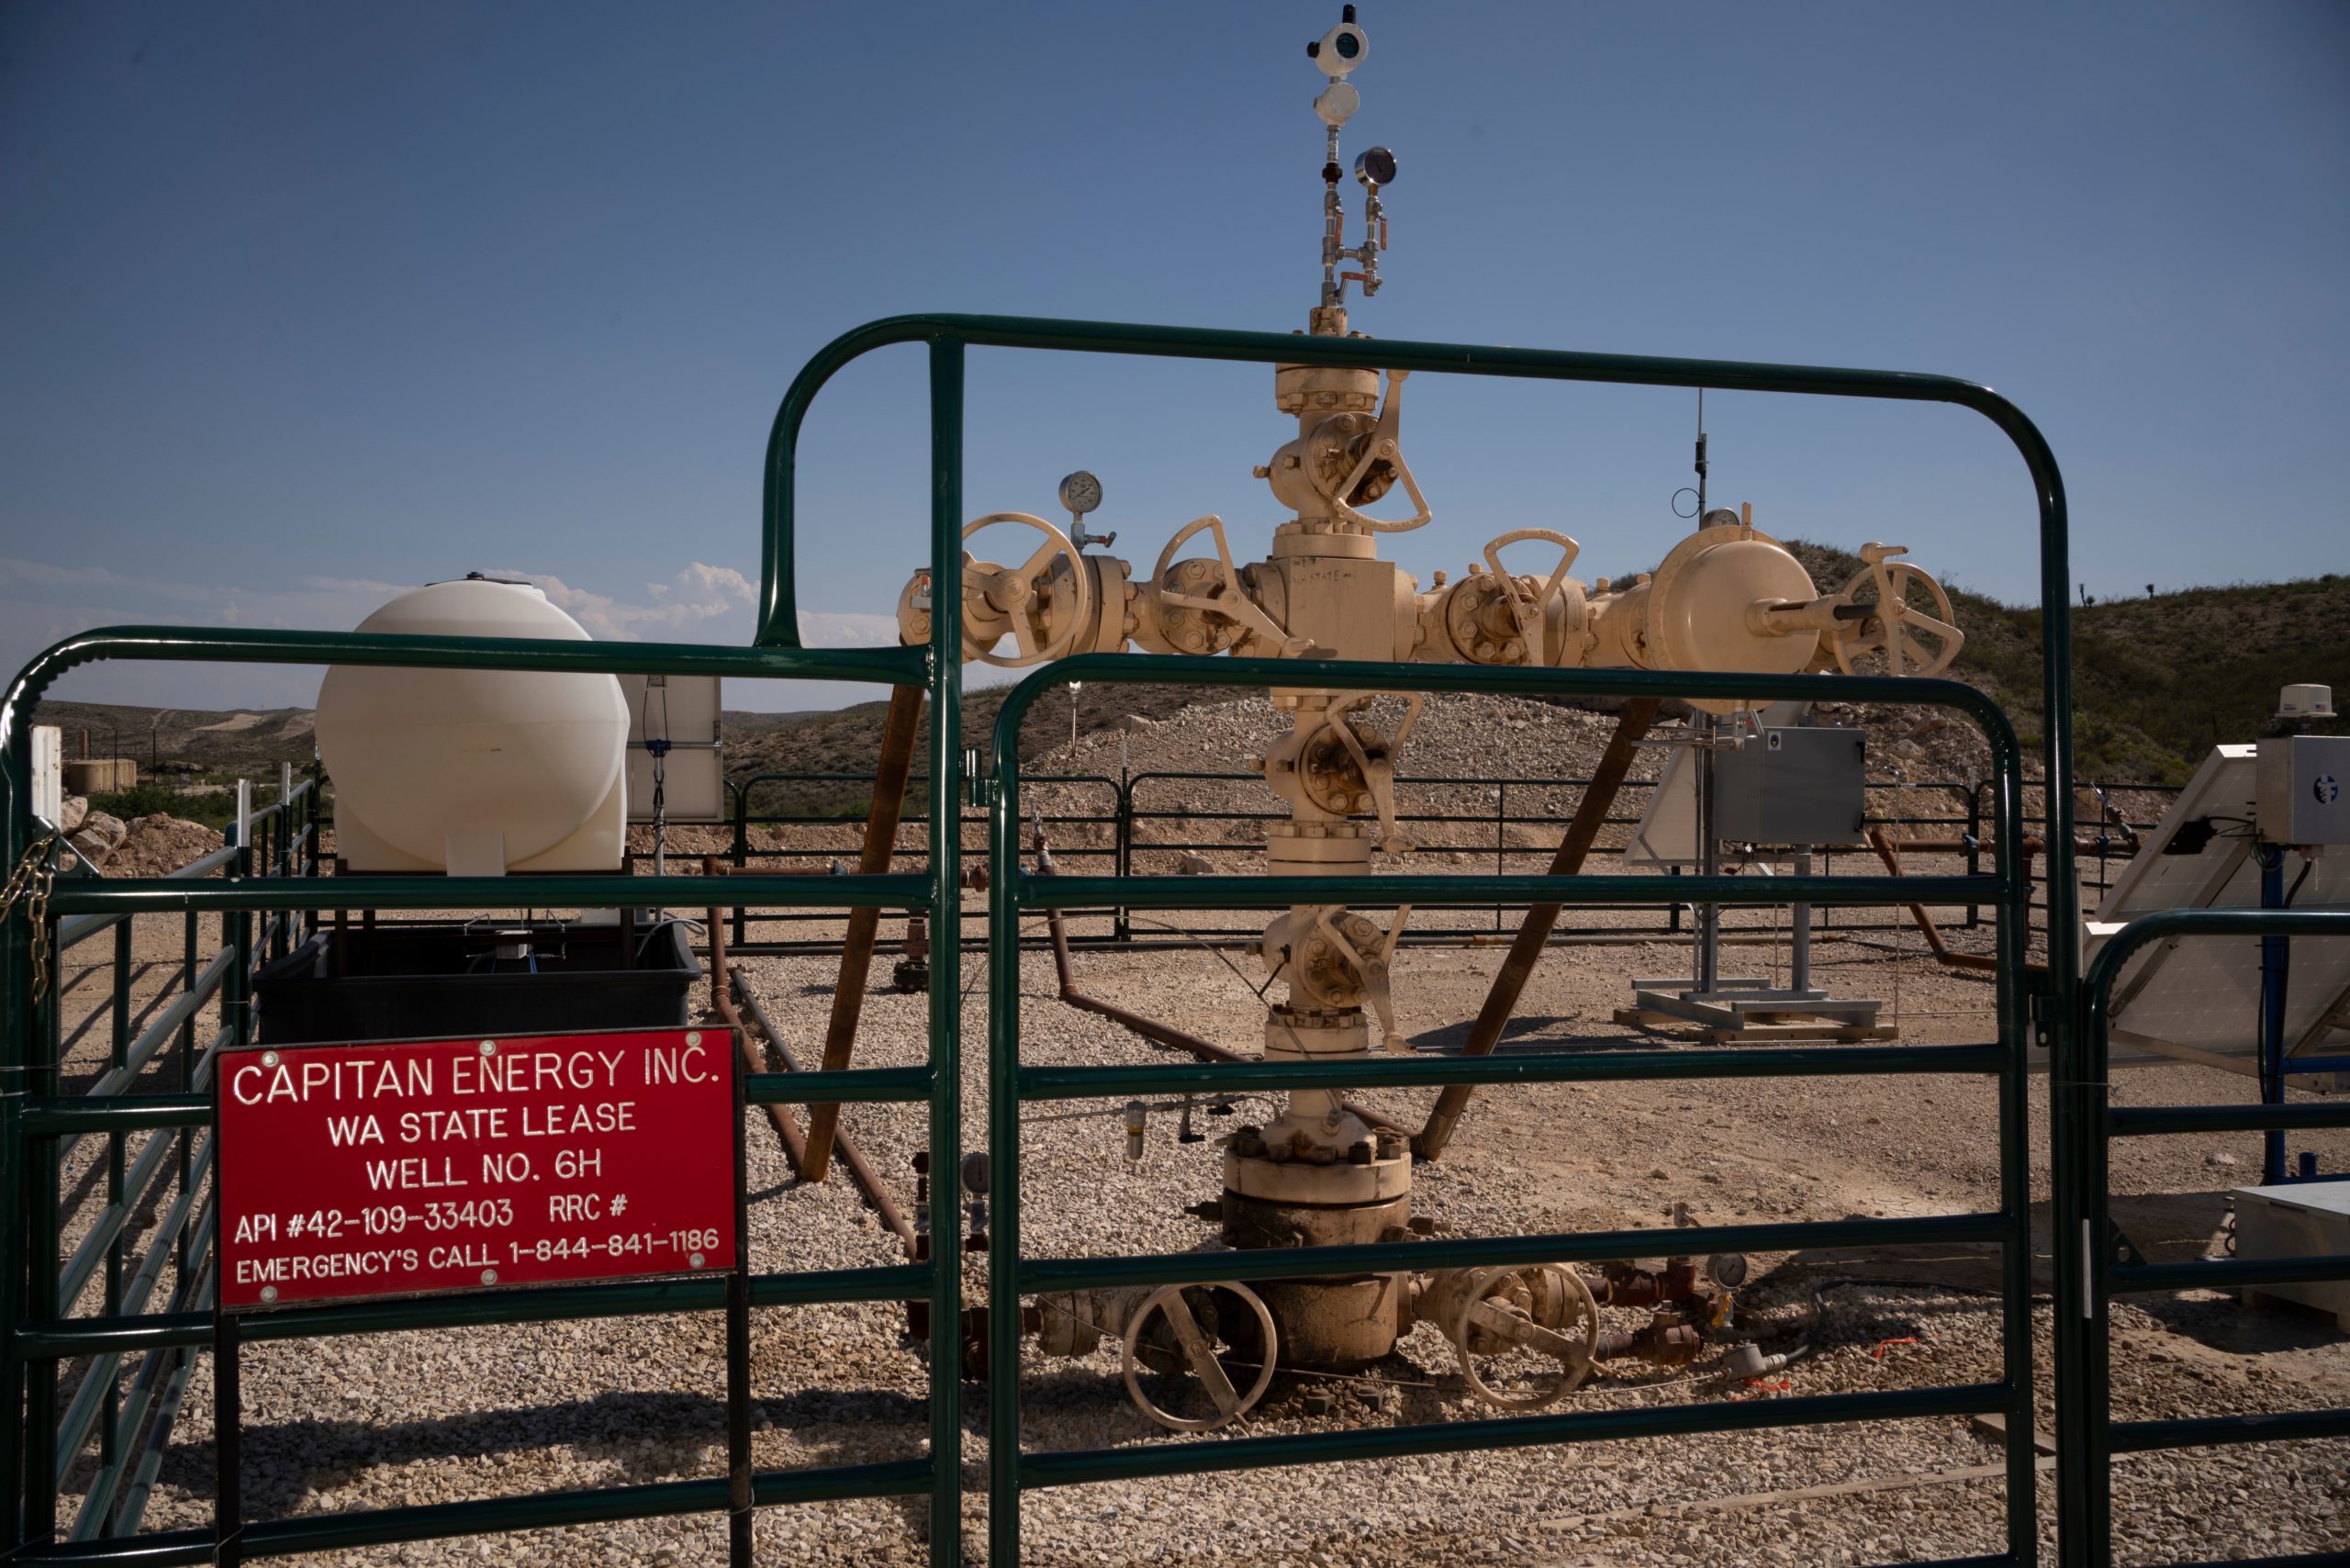 The base of device which is installed at the top of a fracking well is pictured at Capitan Energy on May 7, 2020 in Culberson County, Texas. (Paul Ratje/AFP via Getty Images)